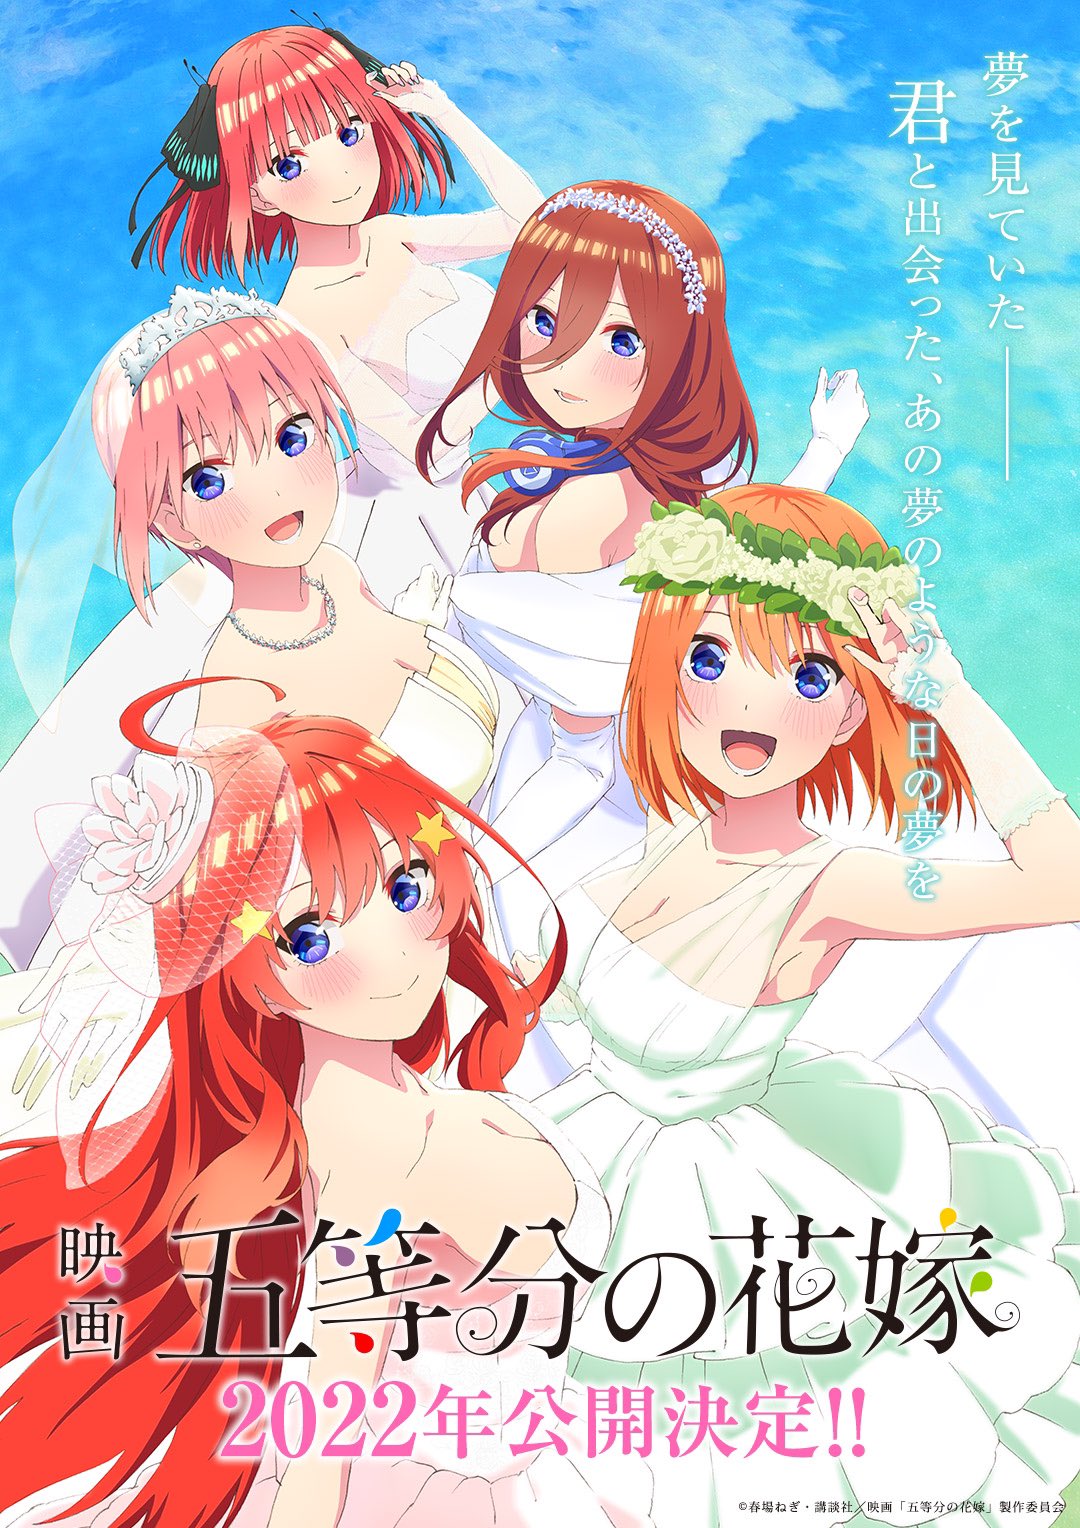 The Quintessential Quintuplets 3rd Console Game Reveals September 7 Launch   News  Anime News Network